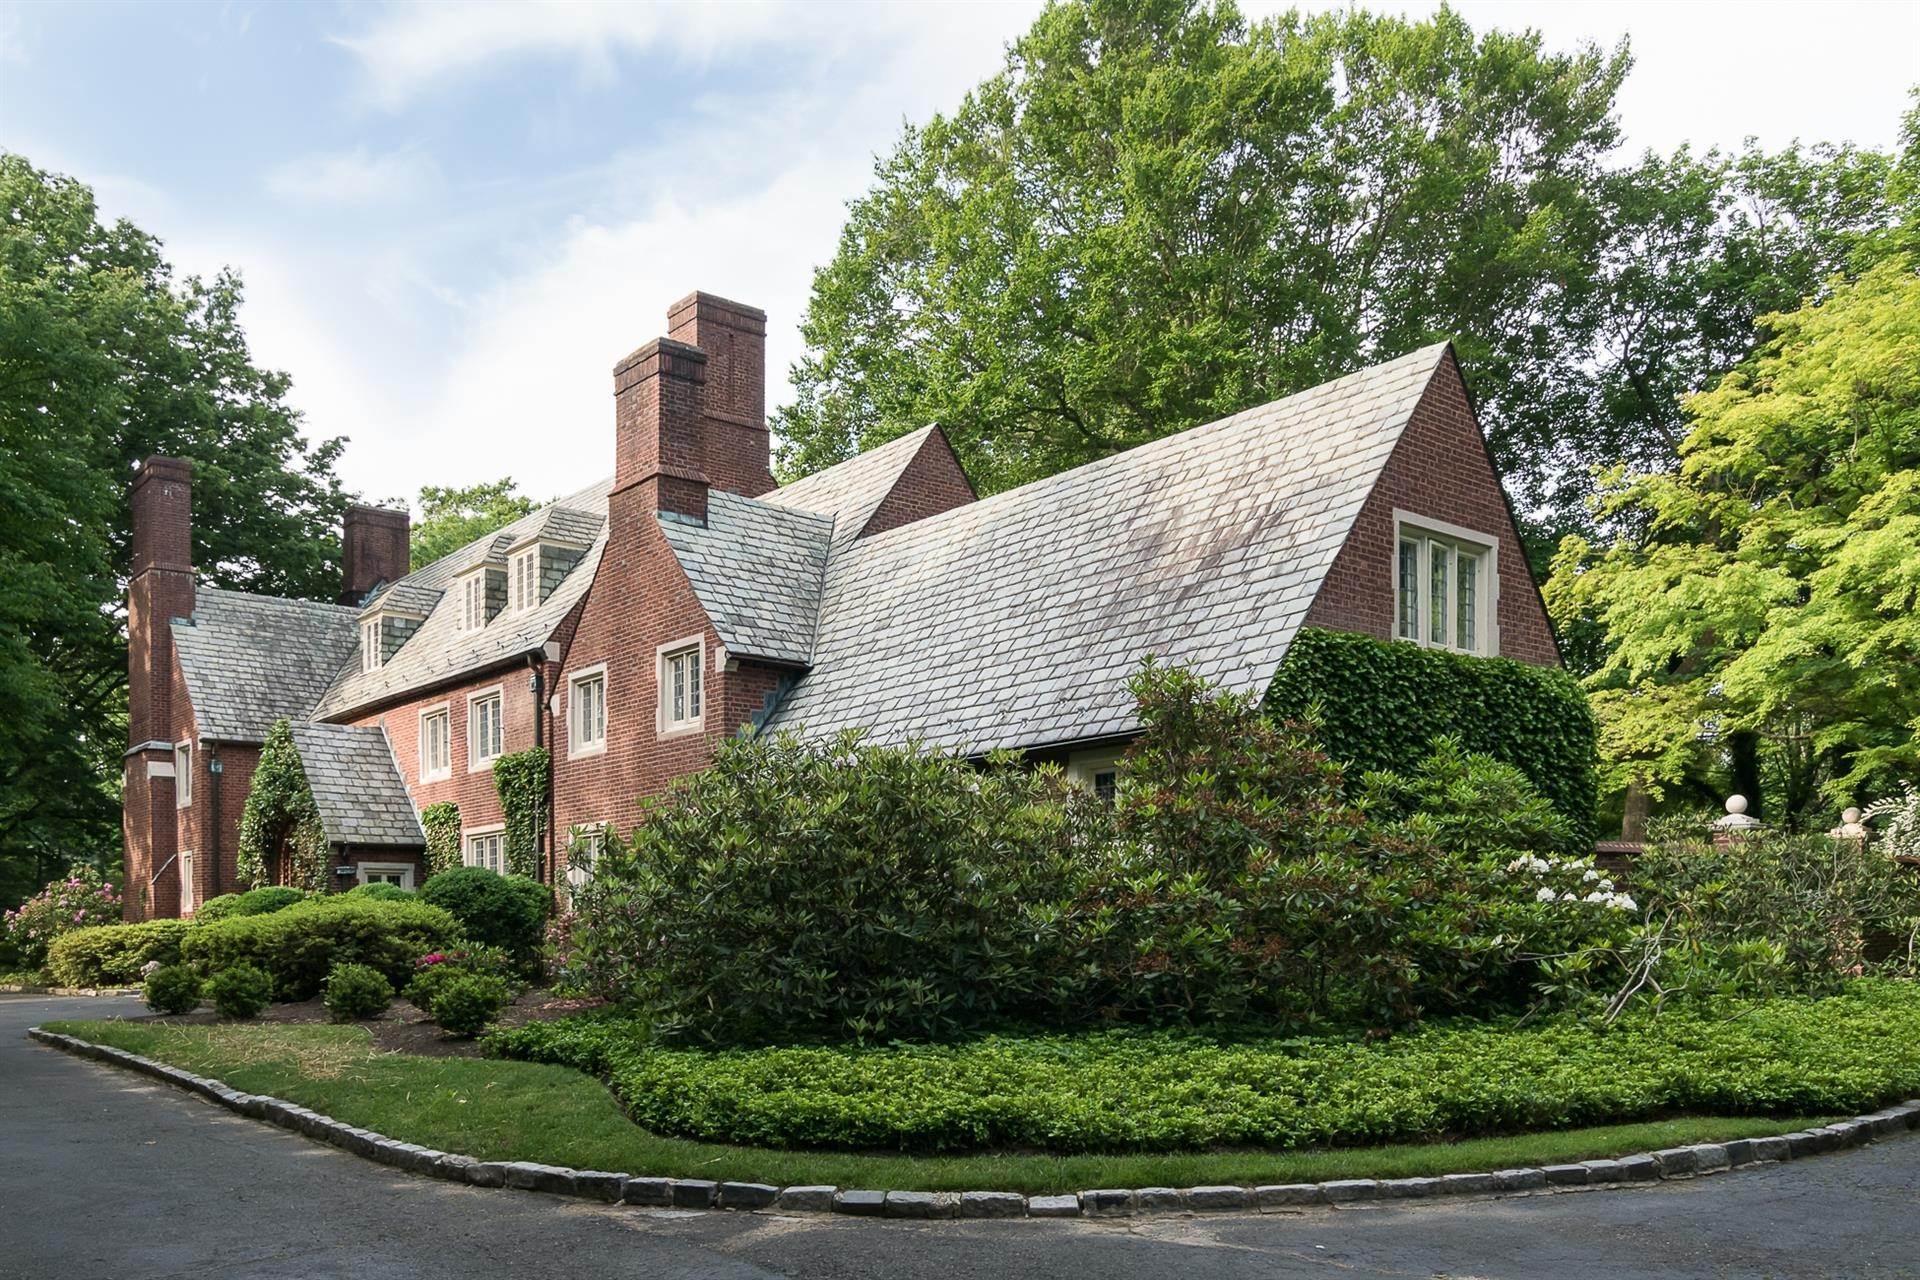 Single Family at Princeton, New Jersey United States